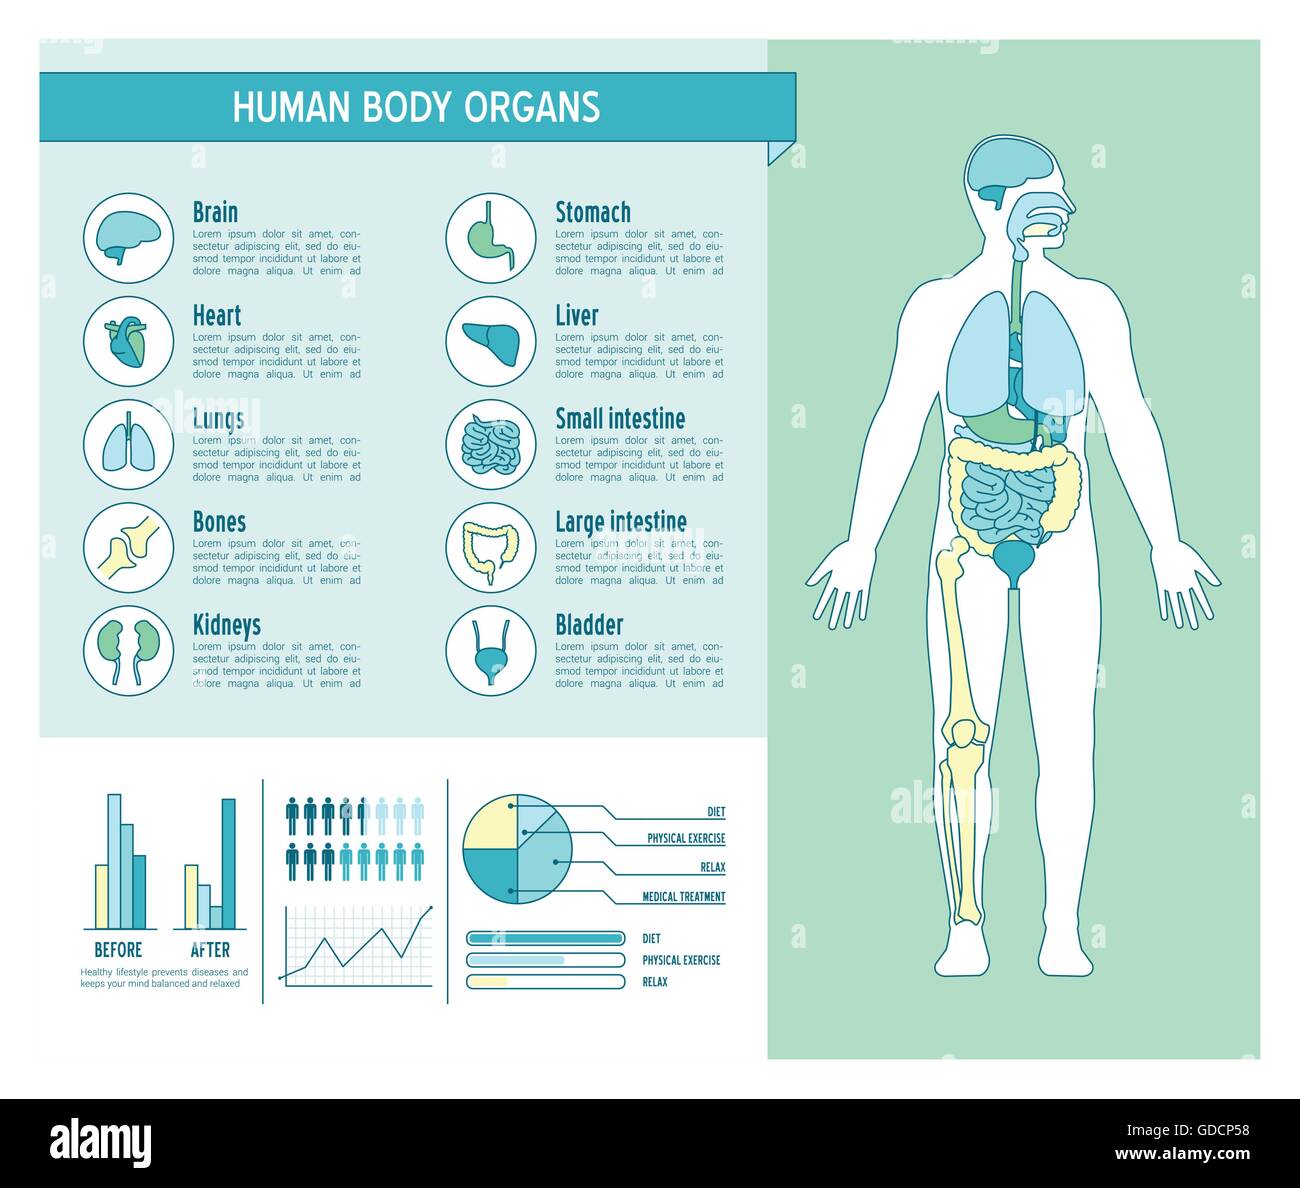 Human body health care infographics, with medical icons, organs, charts, diagarms and copy space Stock Vector